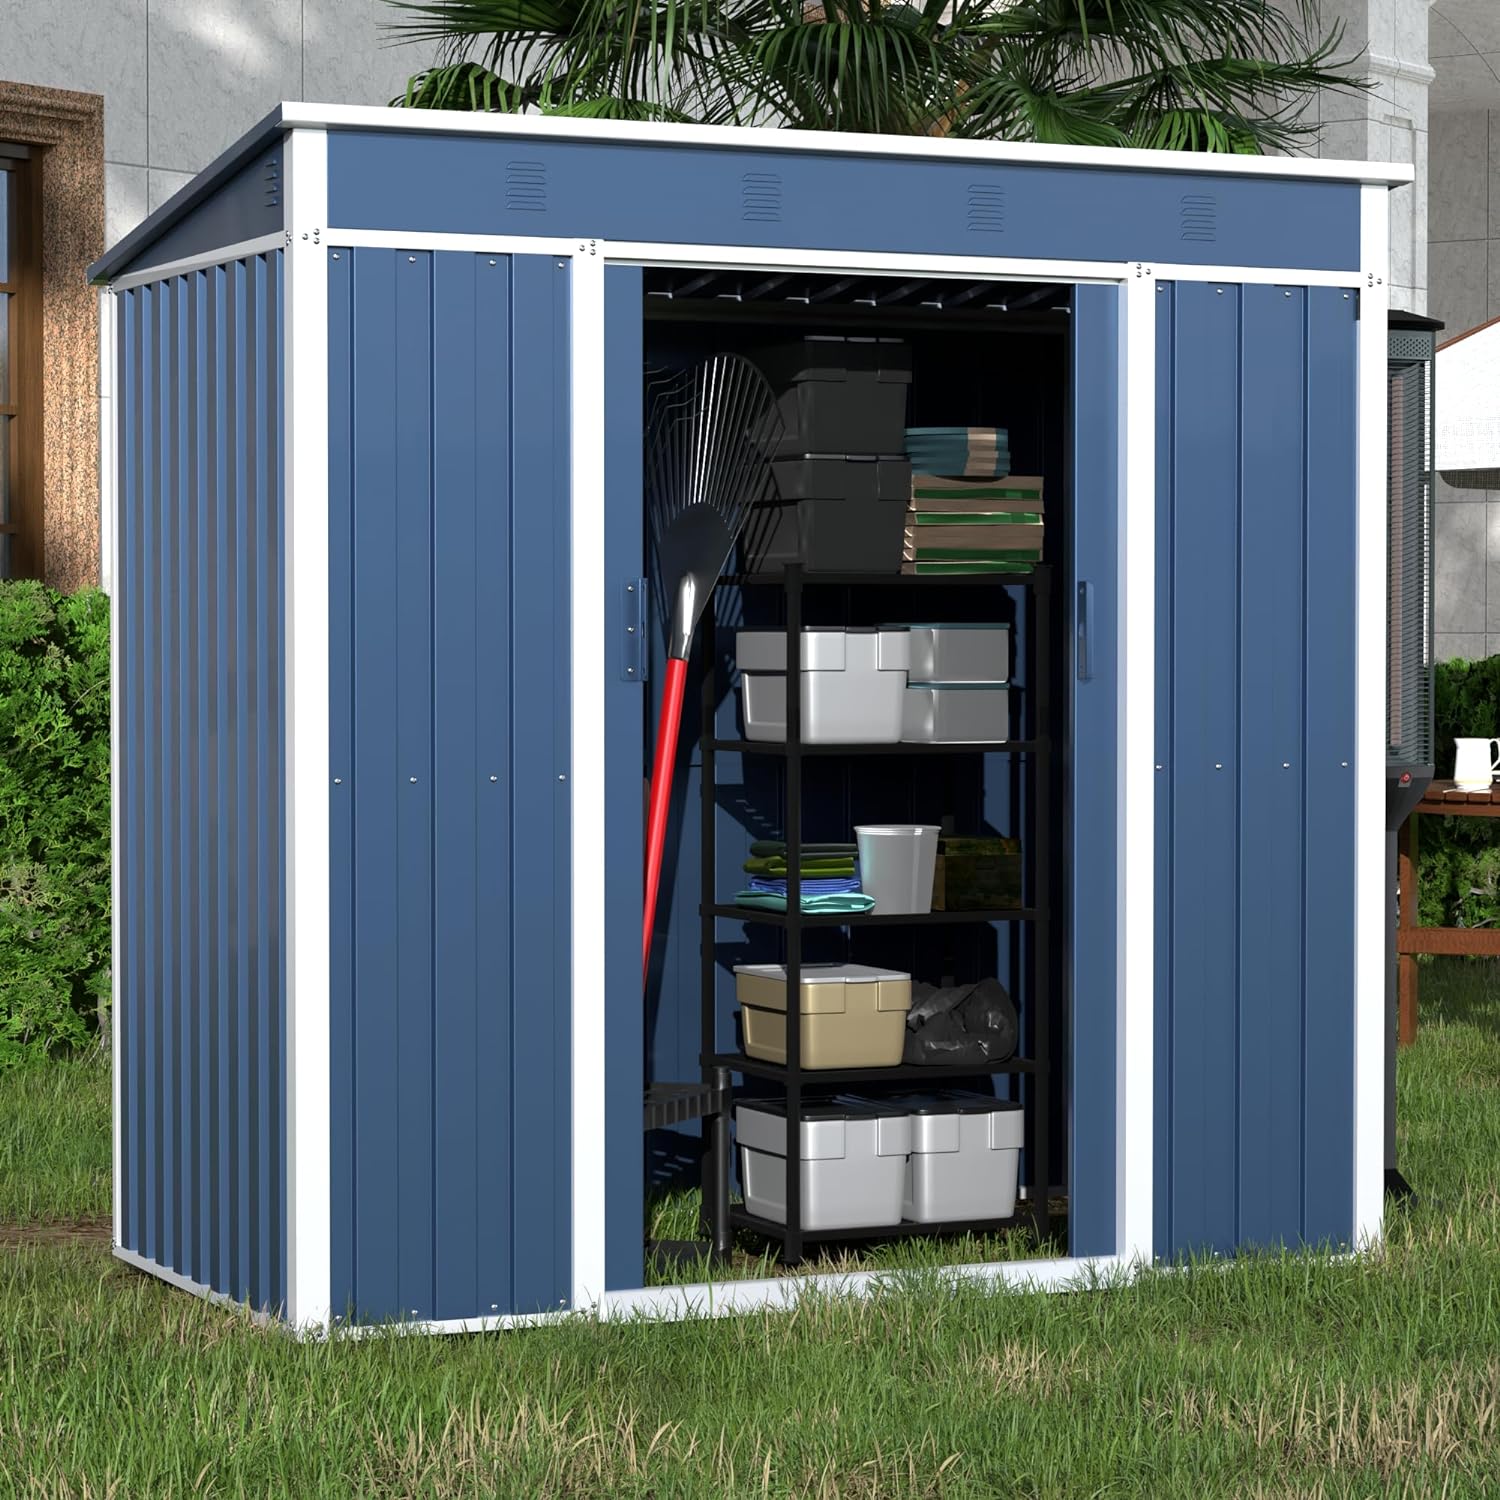 Yizosh  Metal Outdoor Storage Shed, 6.3x4.1 FT Steel Utility Tool Shed Storage House with Sliding Door, Metal Sheds Outdoor Storage for Backyard Garden Patio Lawn (H6'xW6'x D4') Blue&White